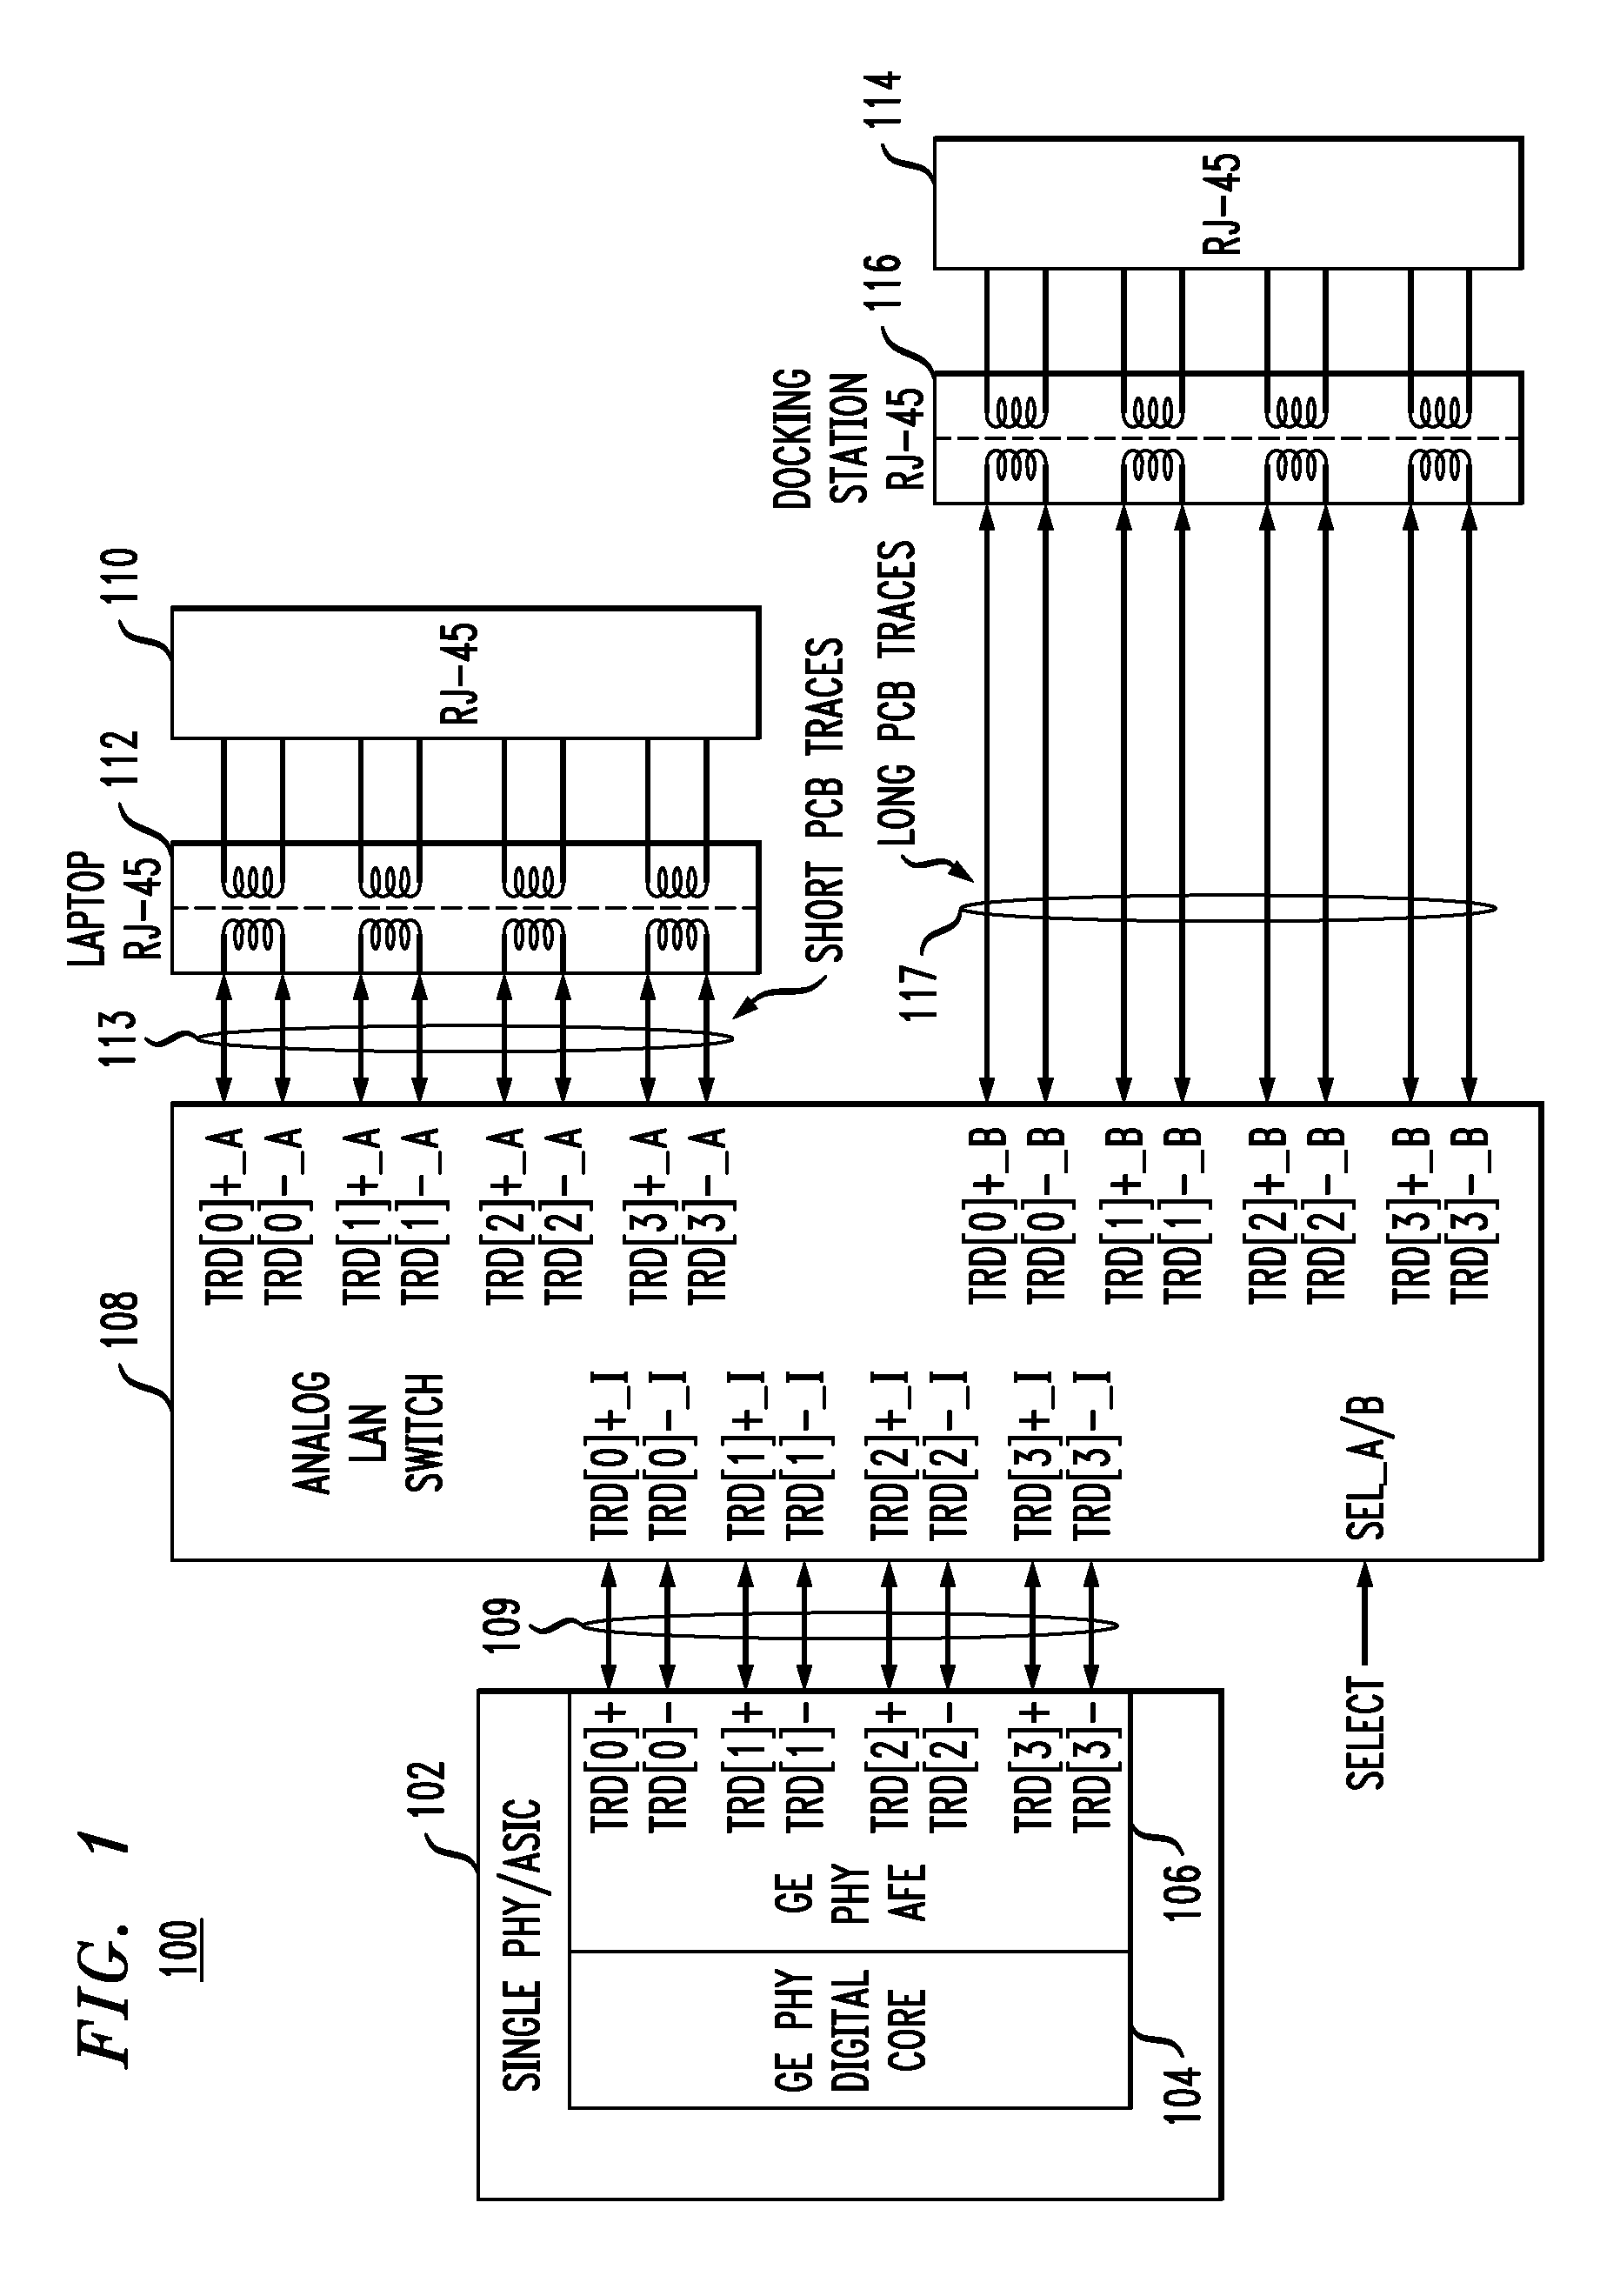 Physical layer interface for computing devices